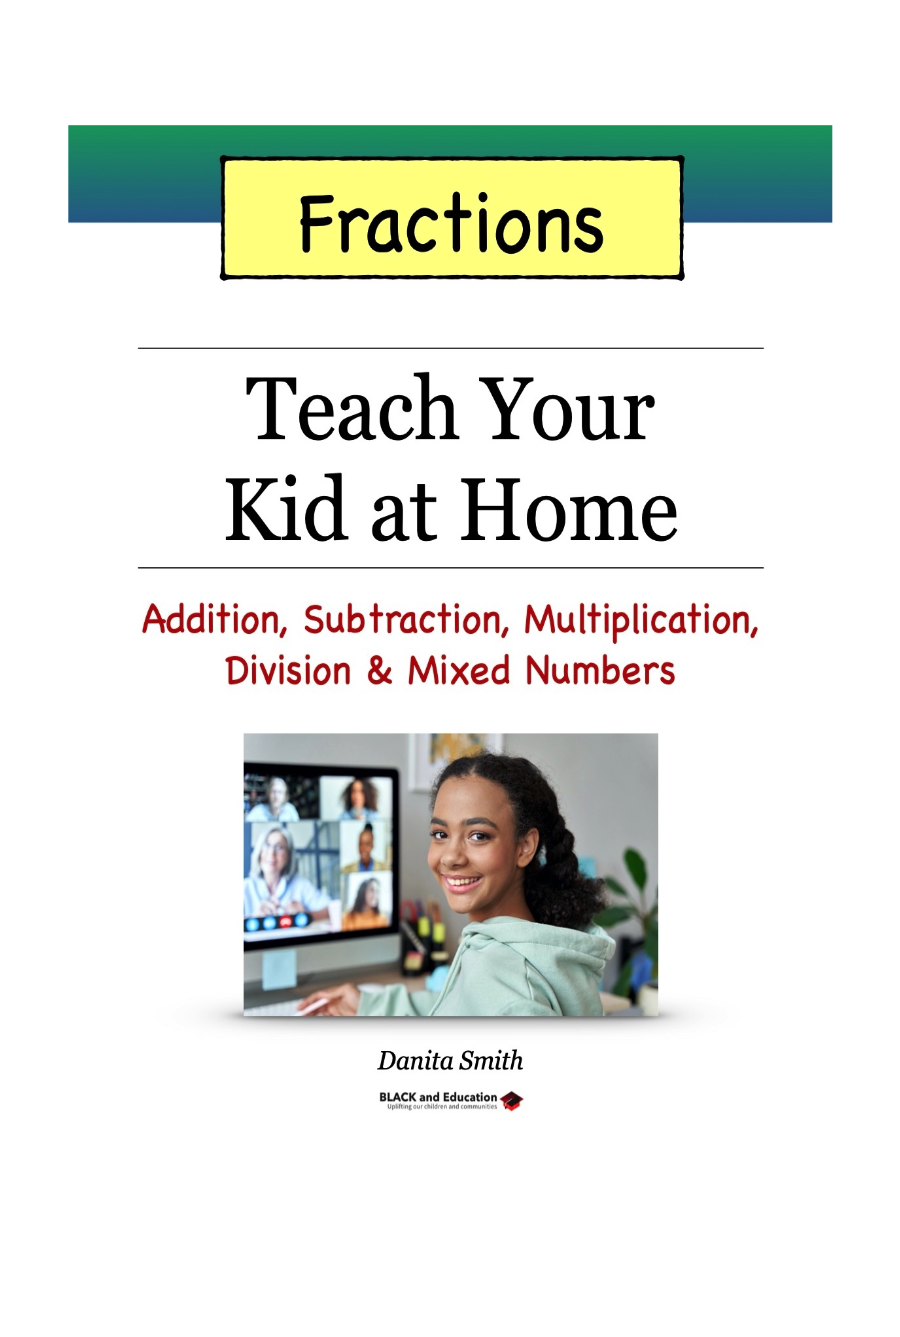 Teach Your Kid at Home Fractions ecover.png